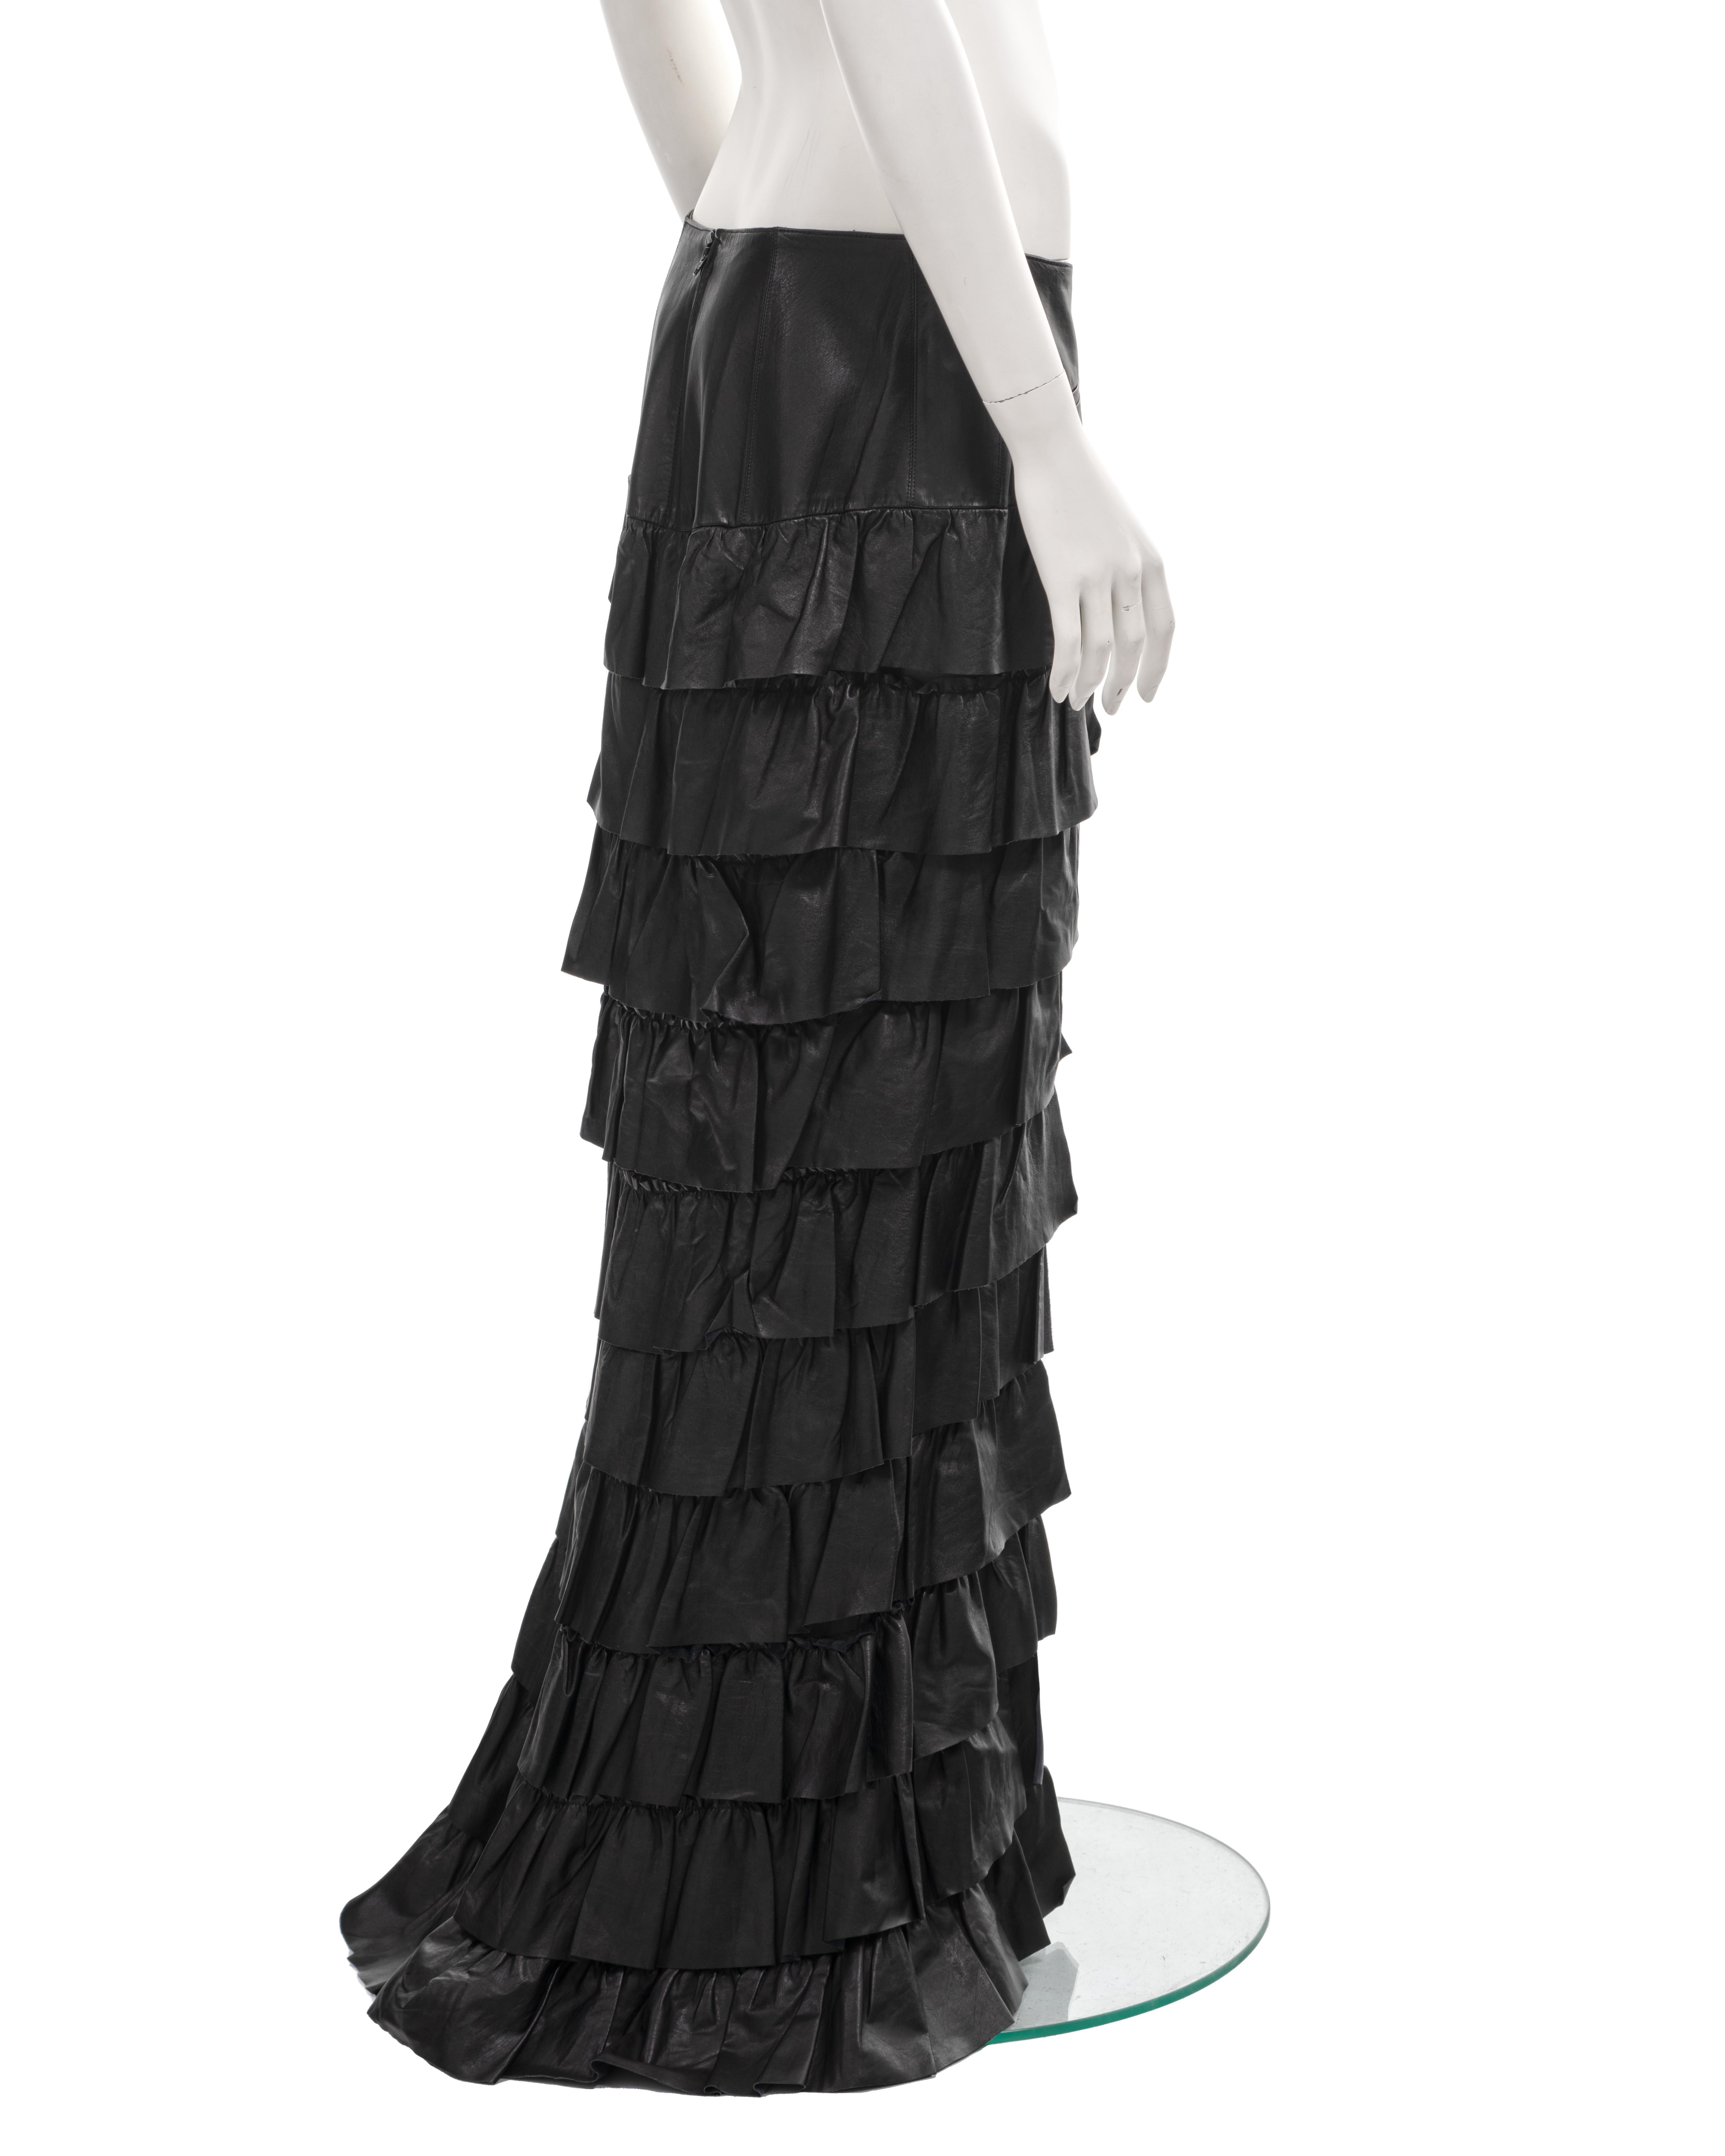 Chanel by Karl Lagerfeld black leather tiered ruffled maxi skirt, fw 2001 3